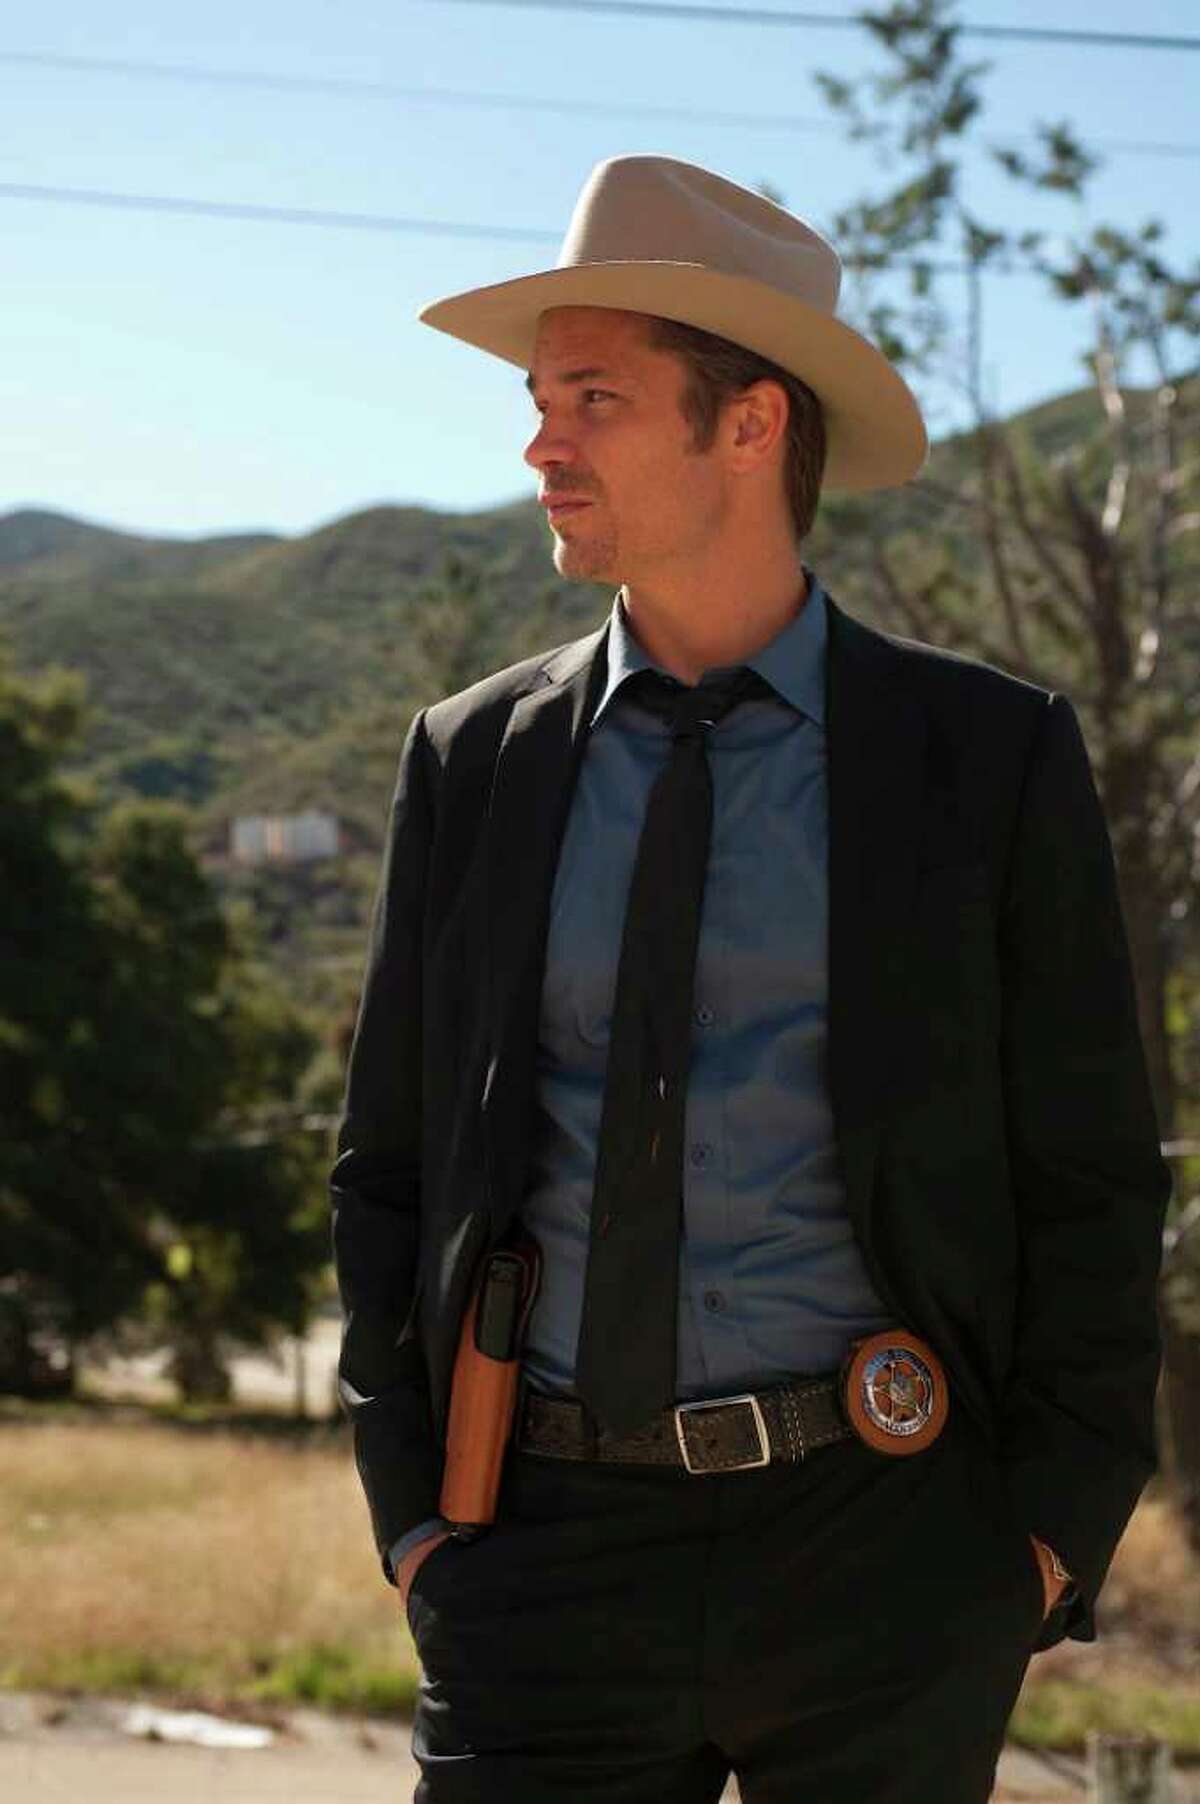 JUSTIFIED: Timothy Olyphant in the season premiere of JUSTIFIED airing Wednesday, Feb. 9 (10:00PM ET/PT) on FX. CR: Prashant Gupta / FX